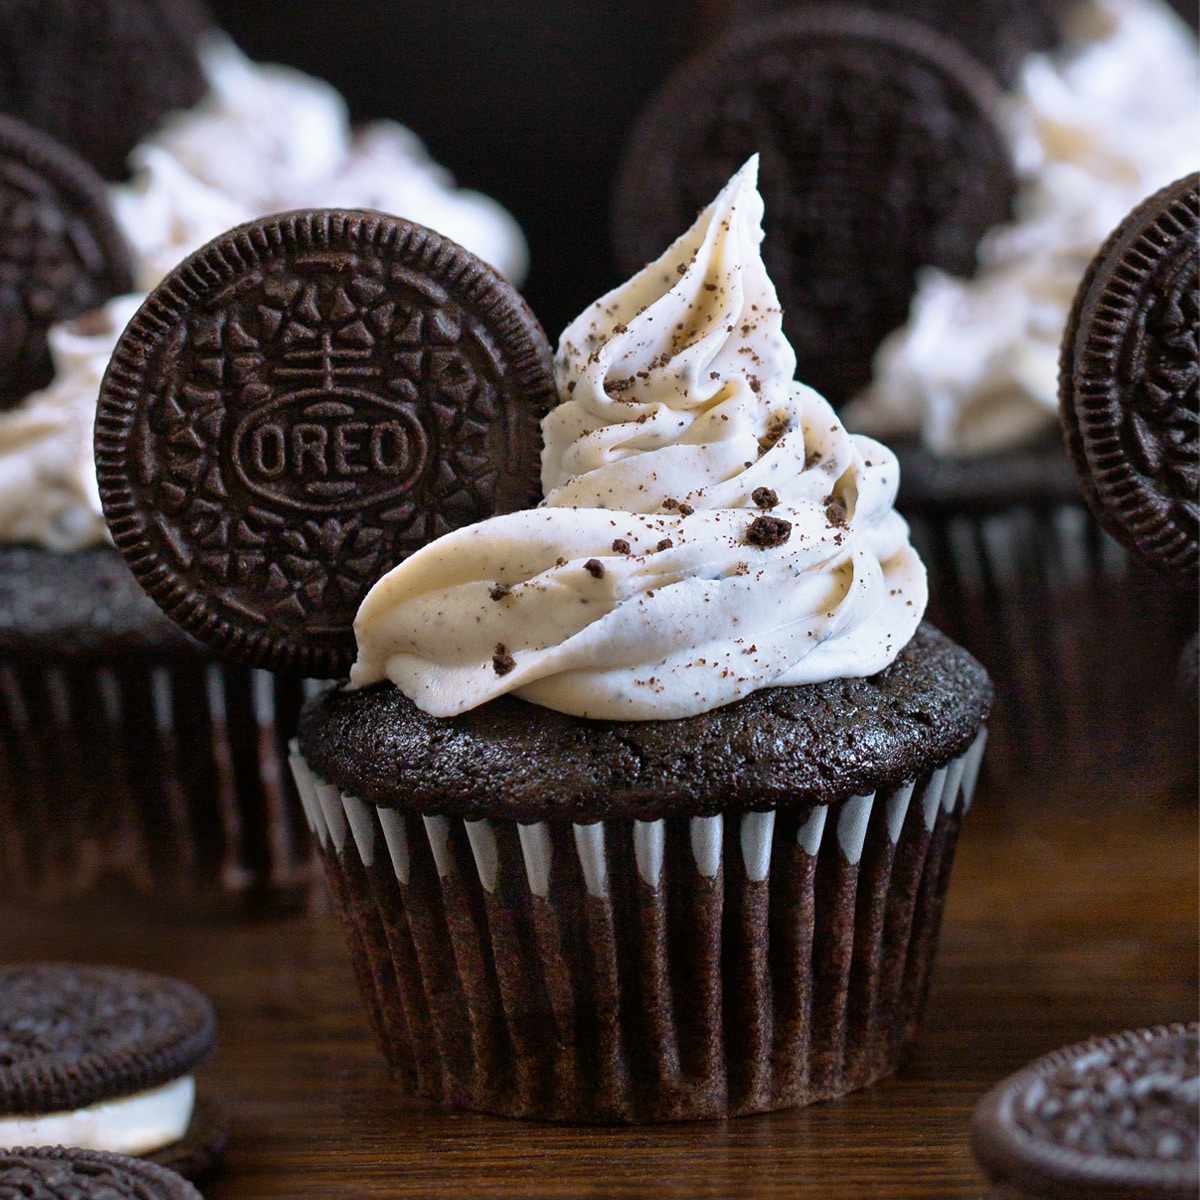 Oreo Cupcakes Recipe - The First Year